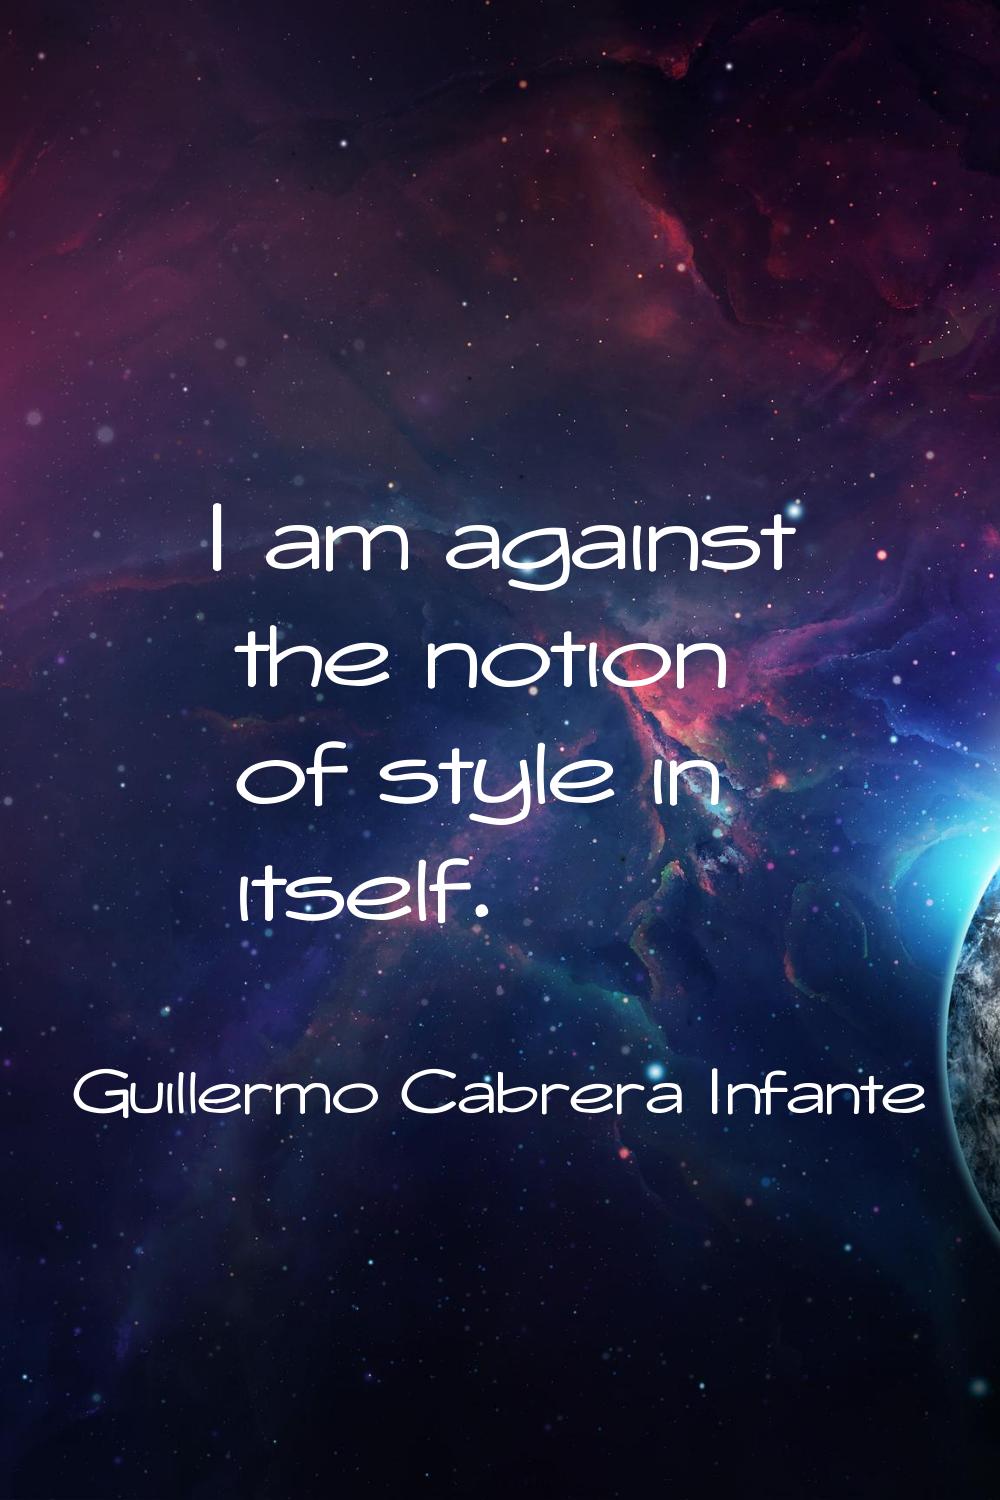 I am against the notion of style in itself.